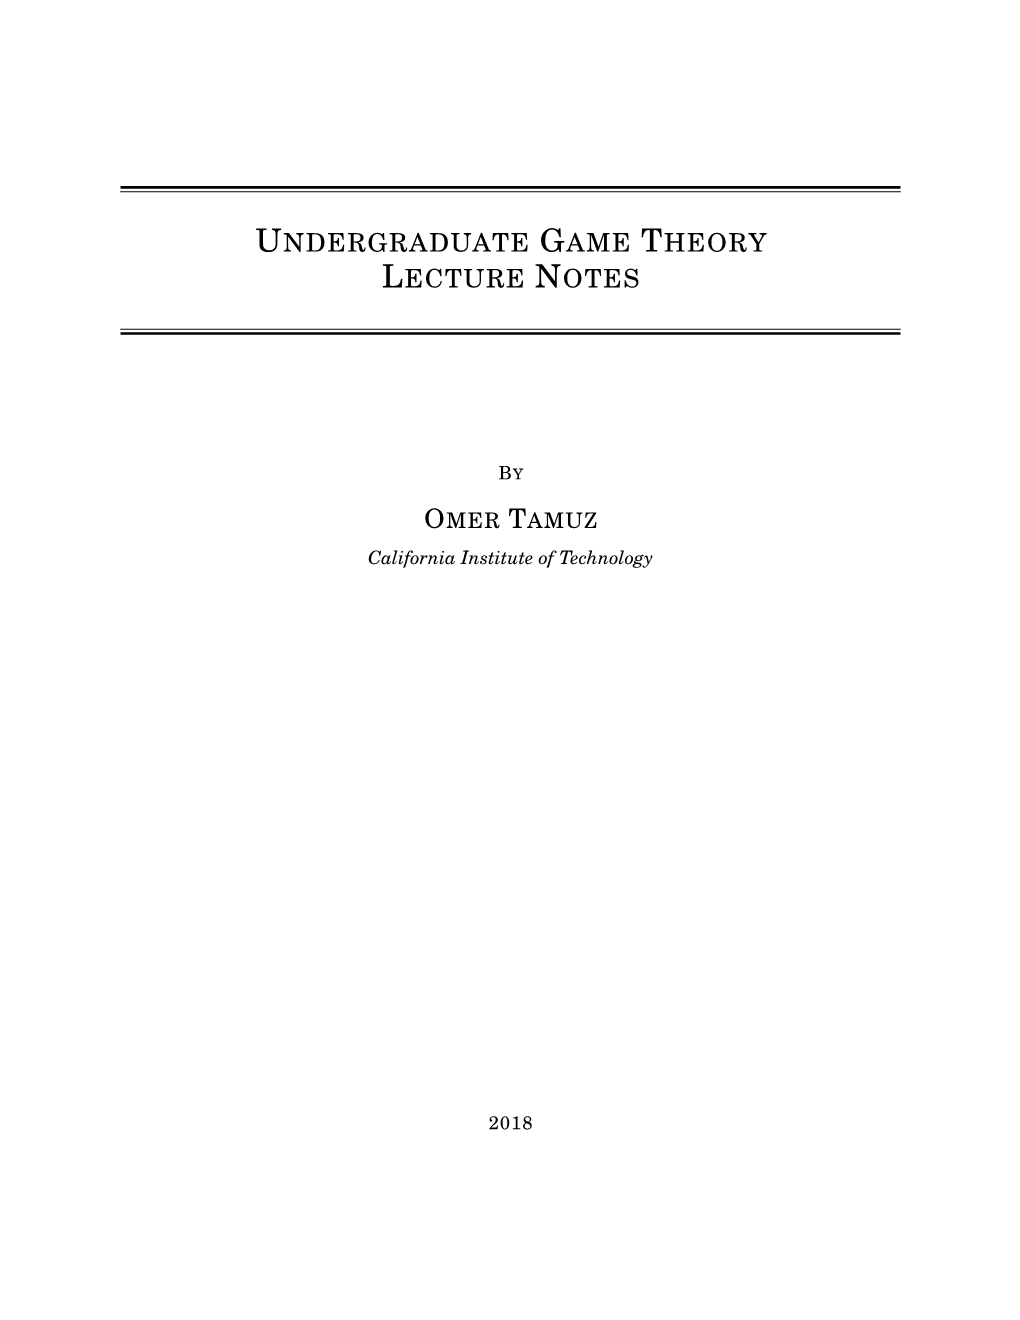 Undergraduate Game Theory Lecture Notes